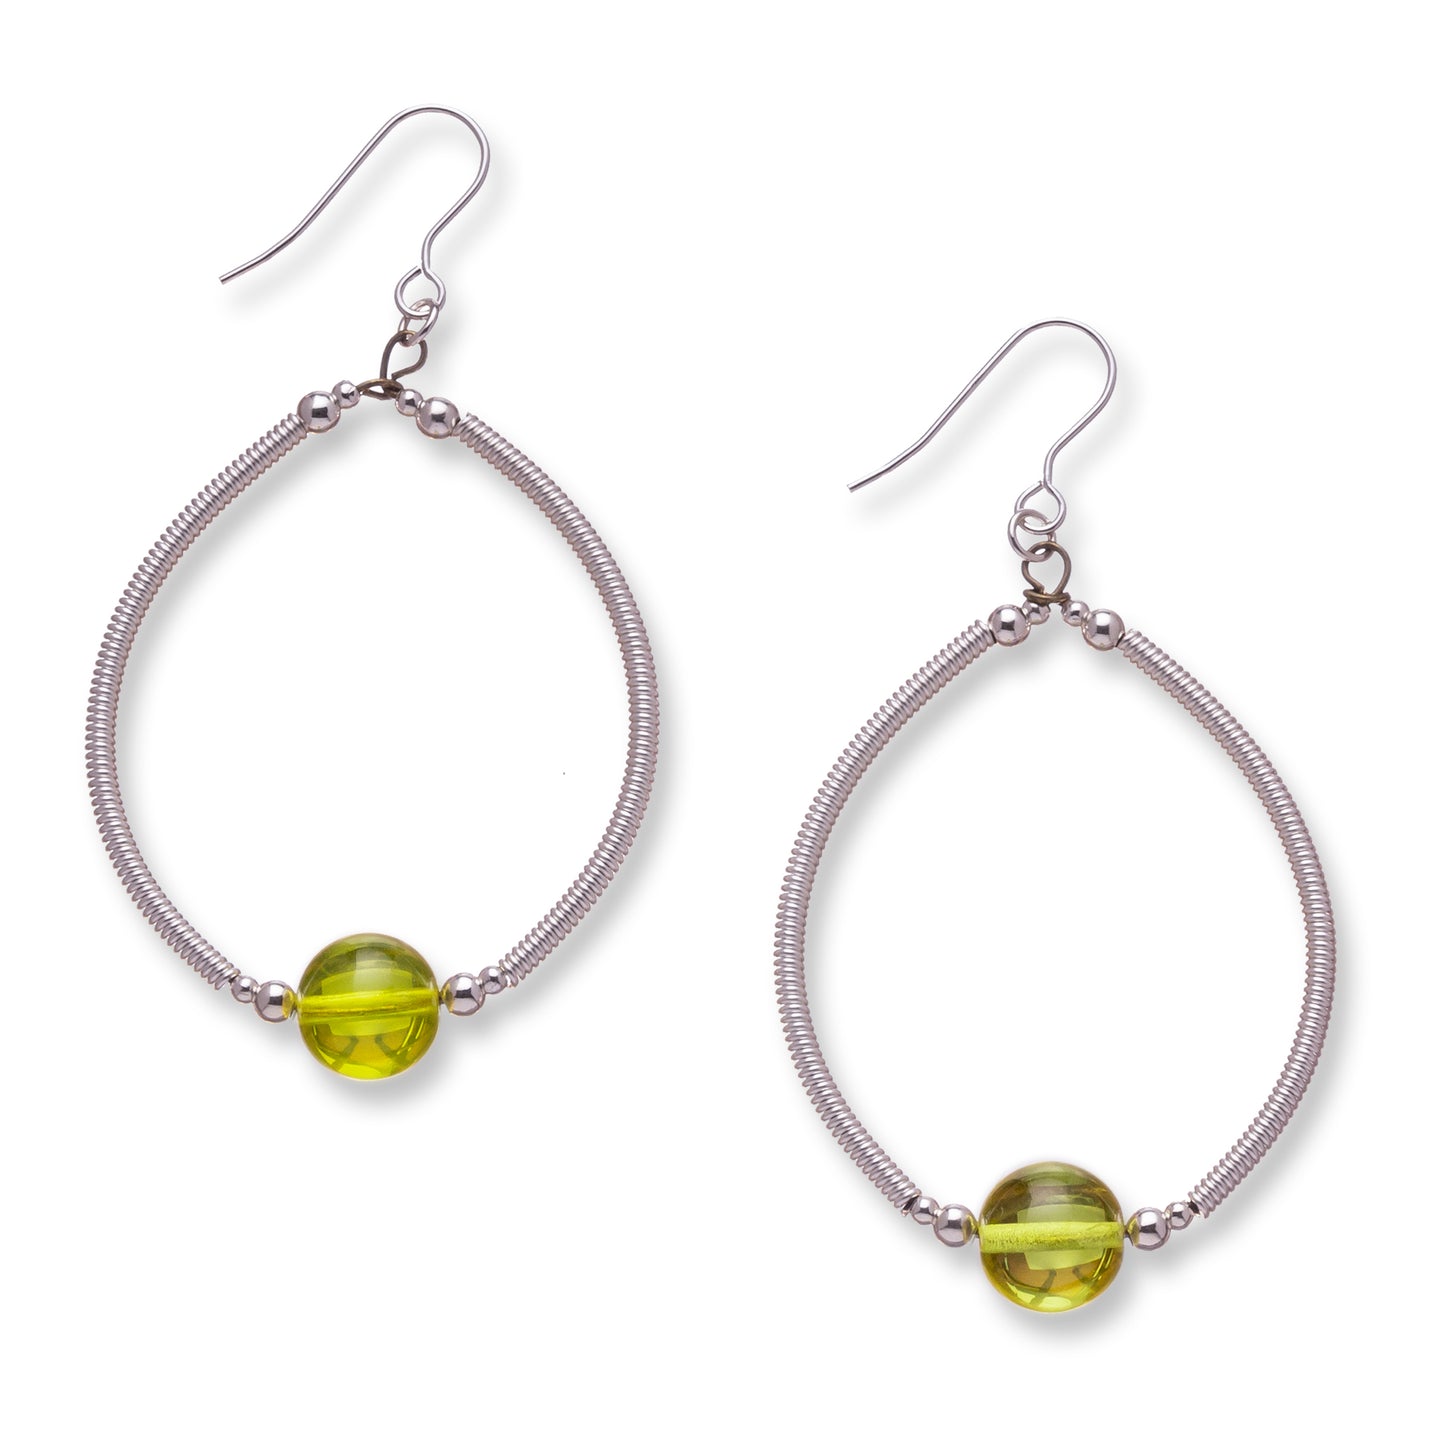 Large hoops made from hand wrapped silver filled tubes, sterling silver beads and feature a gorgeous bright yellow transparent glass bead at the bottom centre of the hoop.  These earrings sit on sterling silver ear wires and and come with backs included. The drop length is 5cm and measured from the base of the ear wire.  They come beautfully presented in an eco friendly branded gift box for safe keeping. Designed & Handmade in Dingle